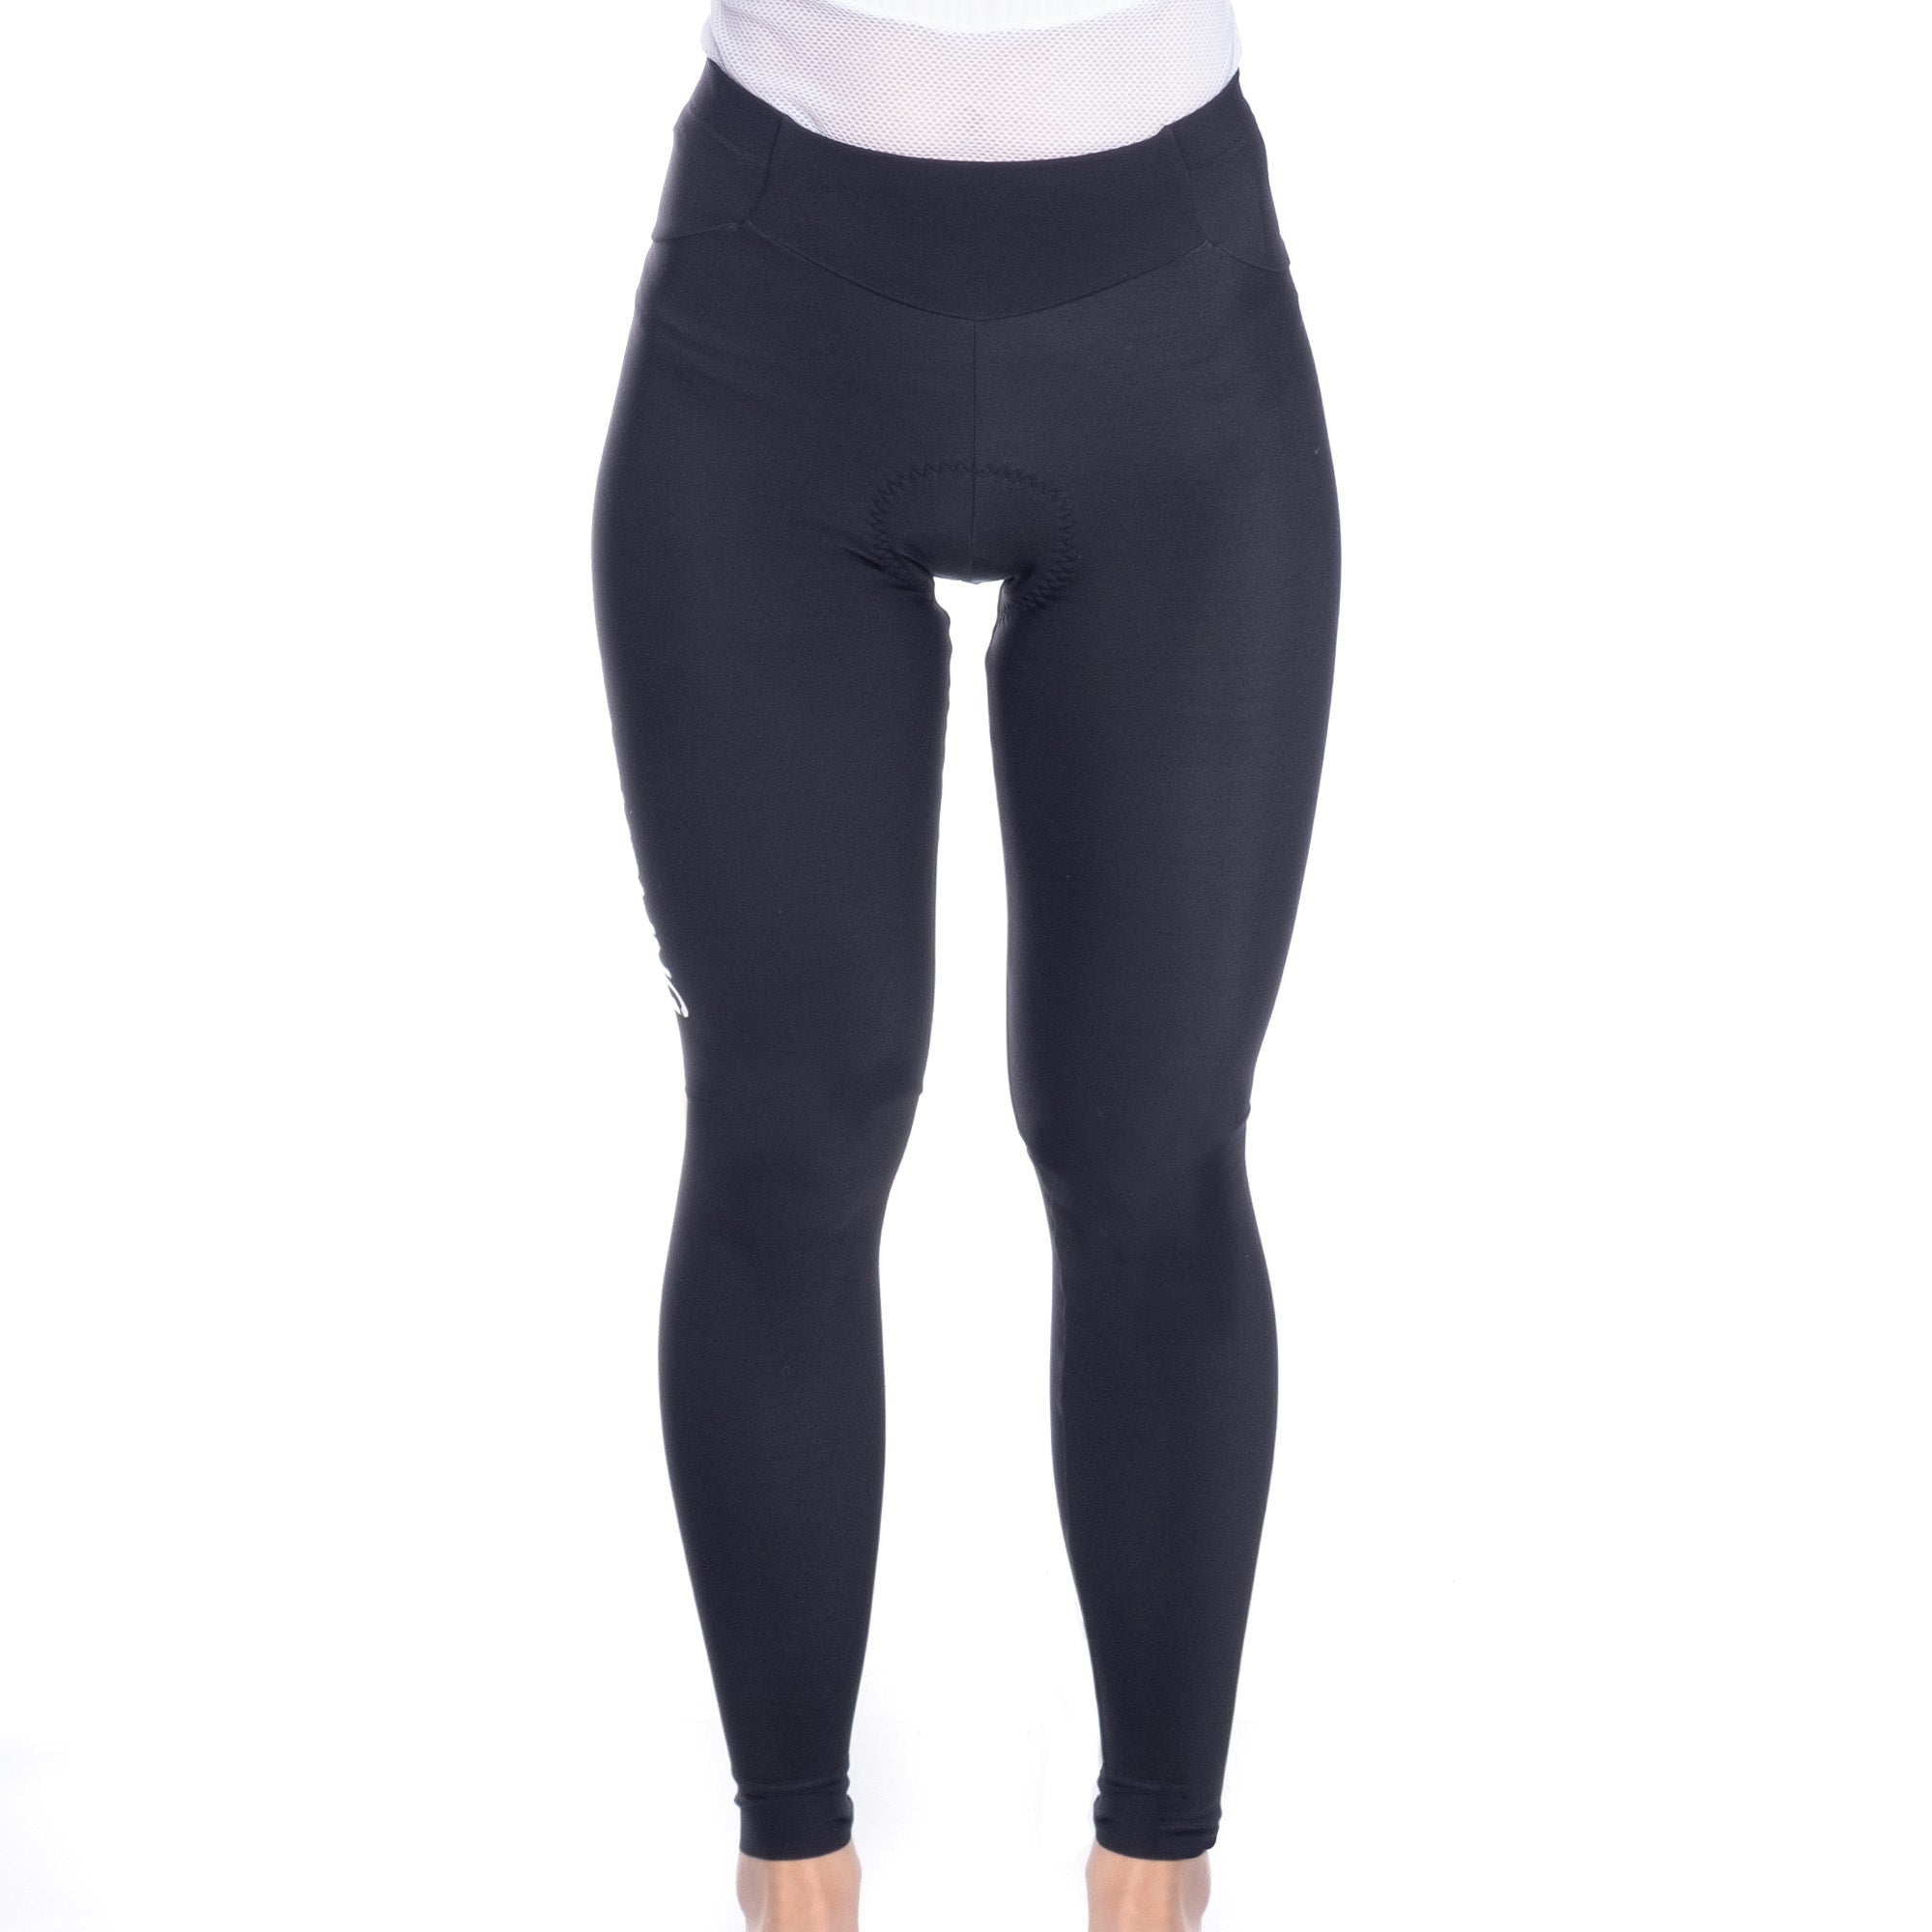 Culotte largo sin tirantes mujer All4cycling Team